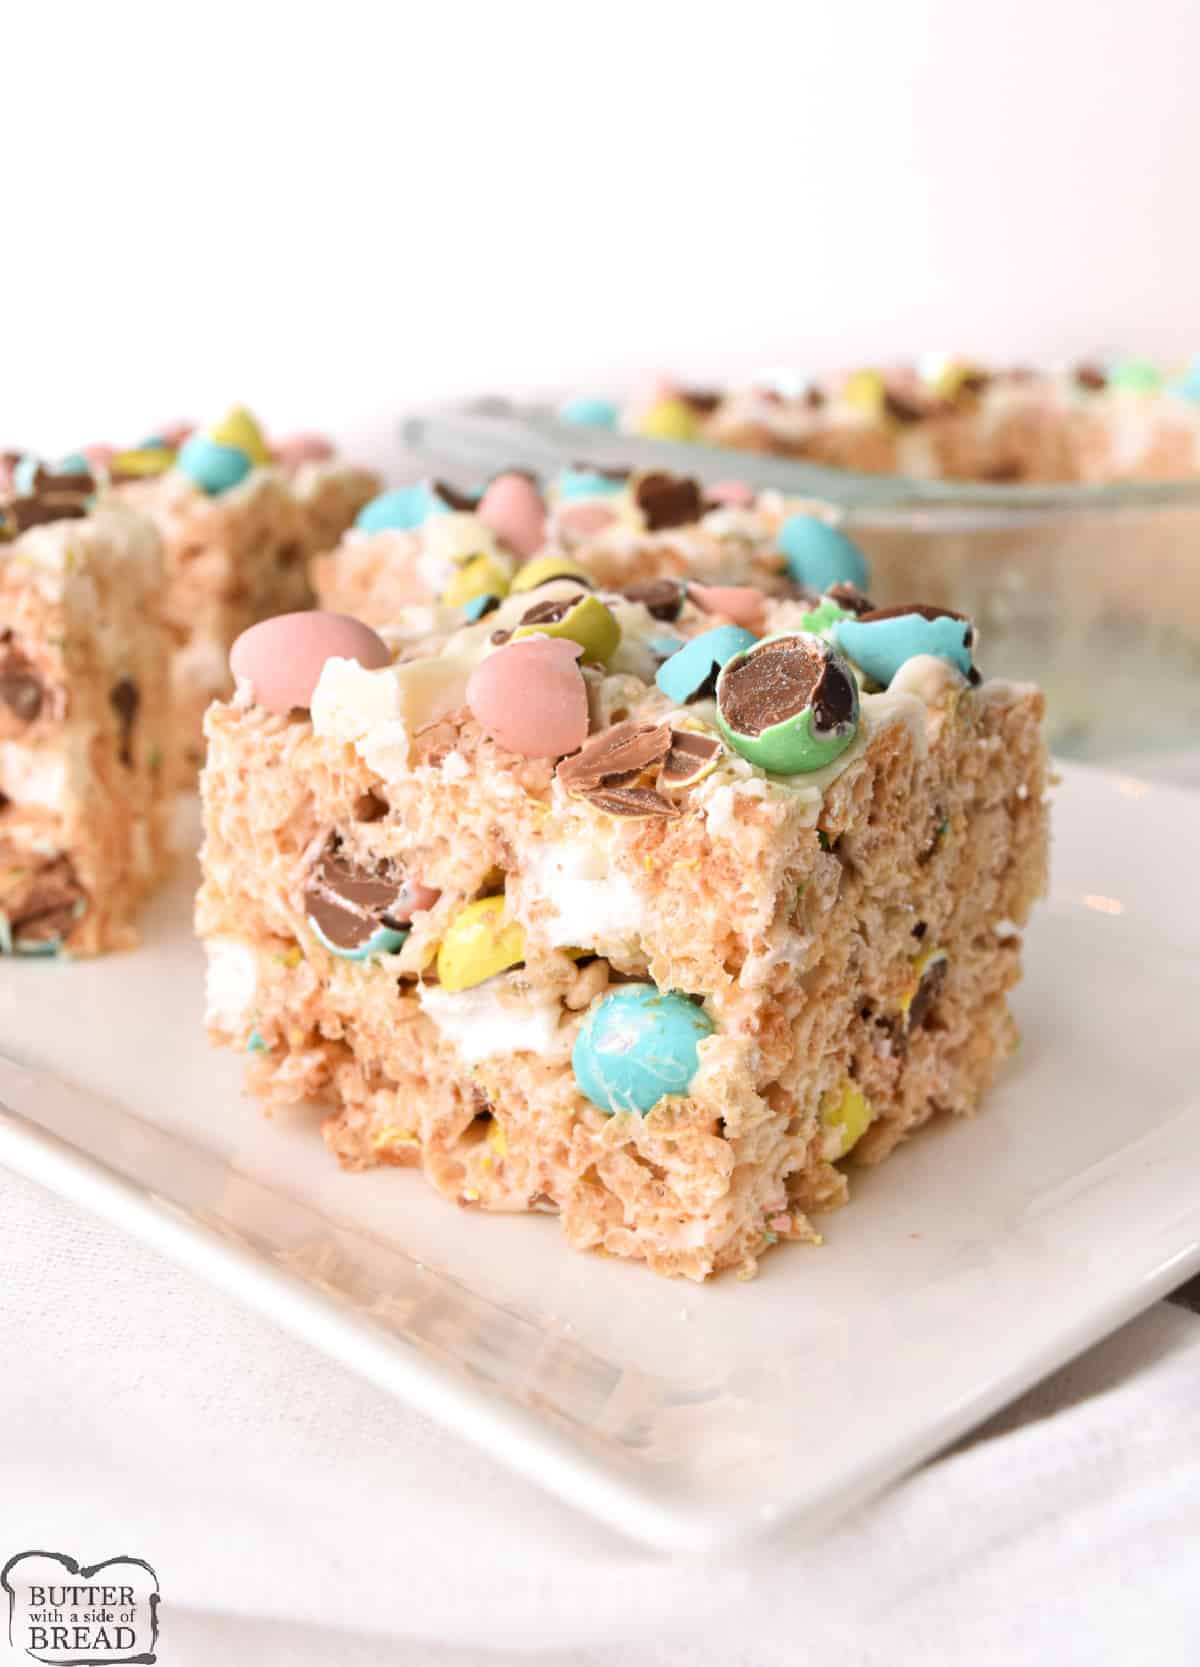 Mini Egg Rice Krispie Treats made with crispy rice cereal, marshmallows, crushed Cadbury mini eggs and topped with a white chocolate drizzle. Rice Krispie Treat recipe that is perfect for Easter and springtime!